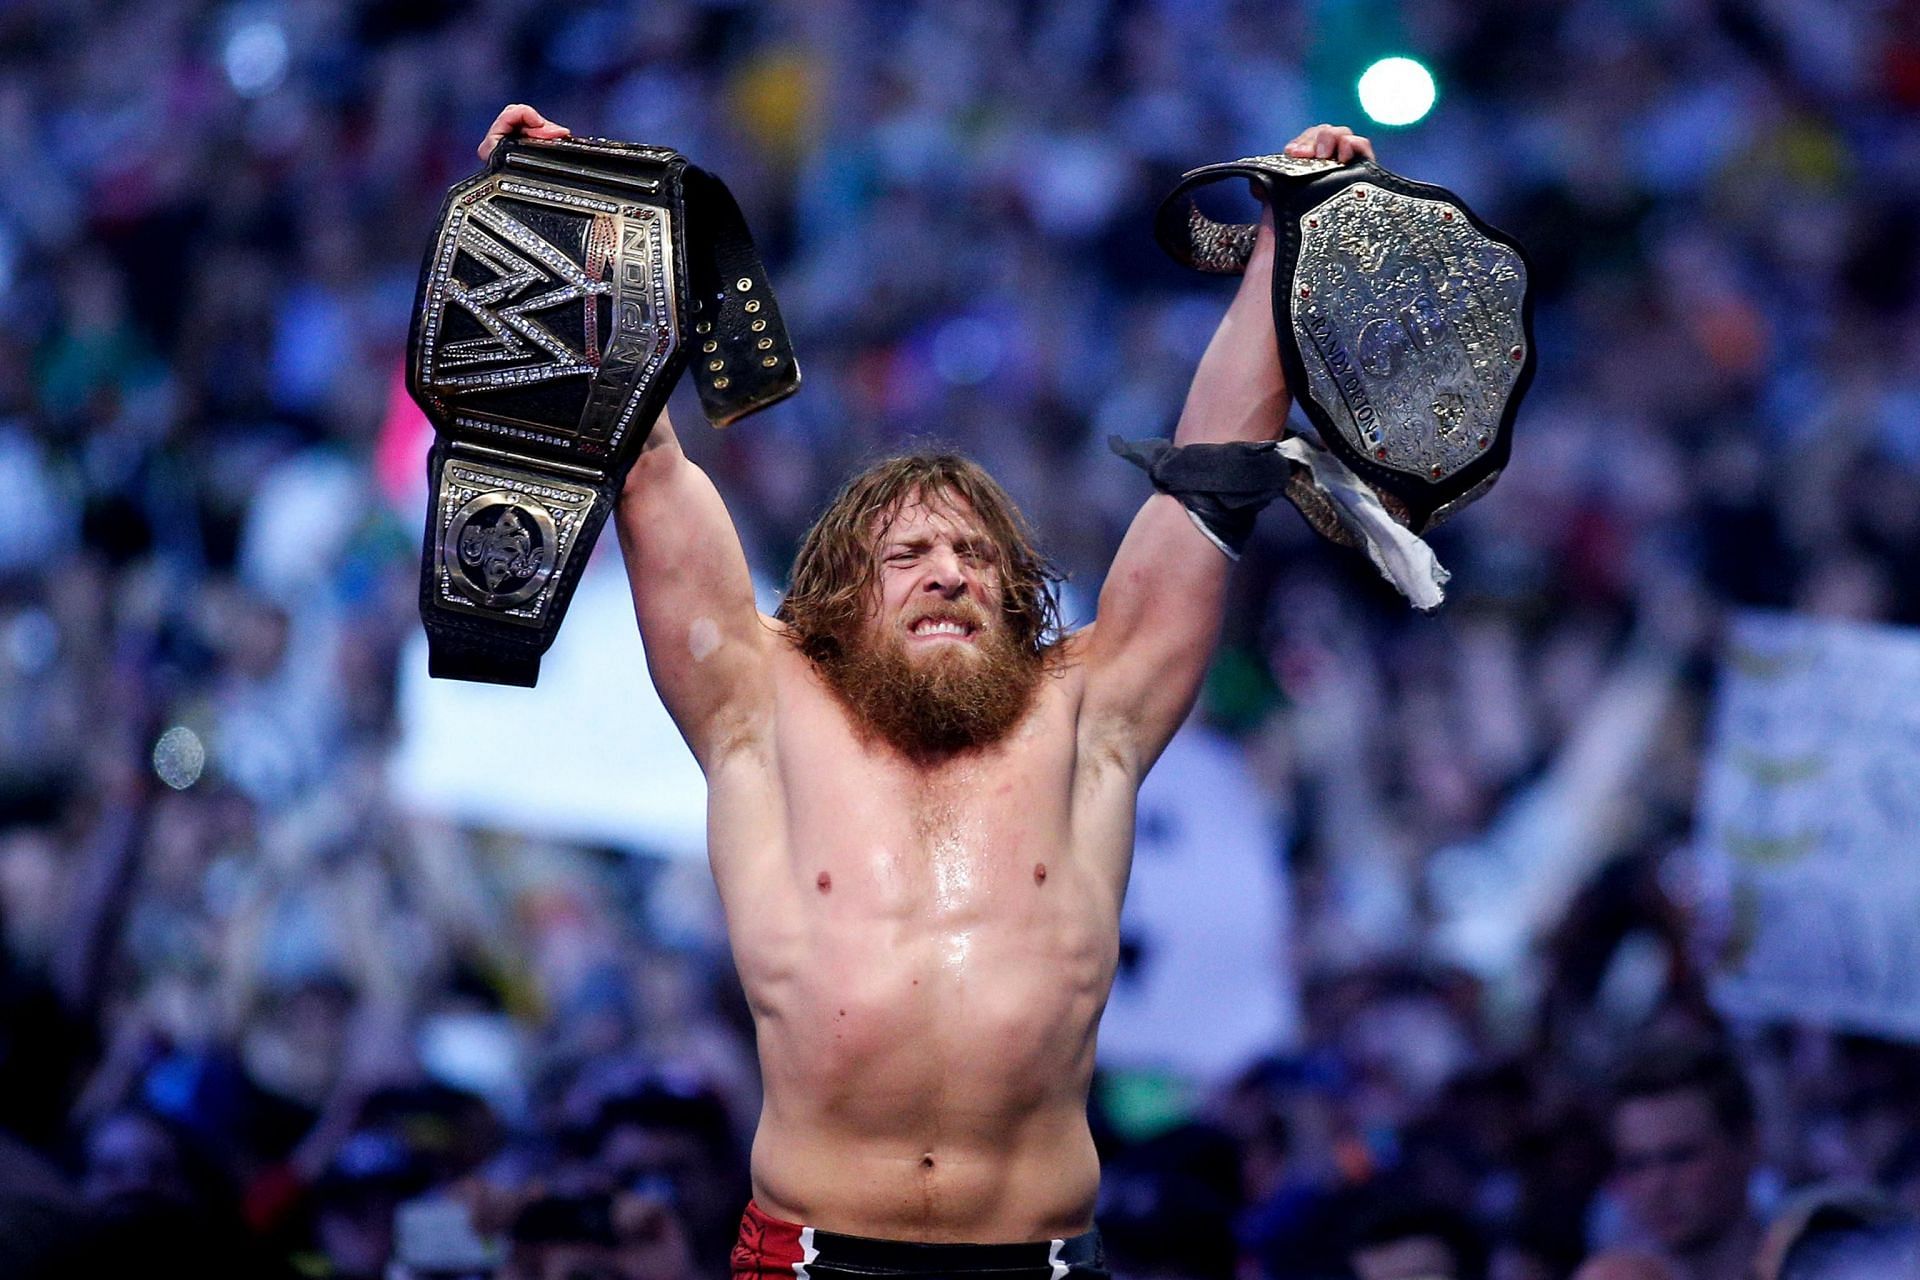 Danielson after in the main event of WrestleMania 30.